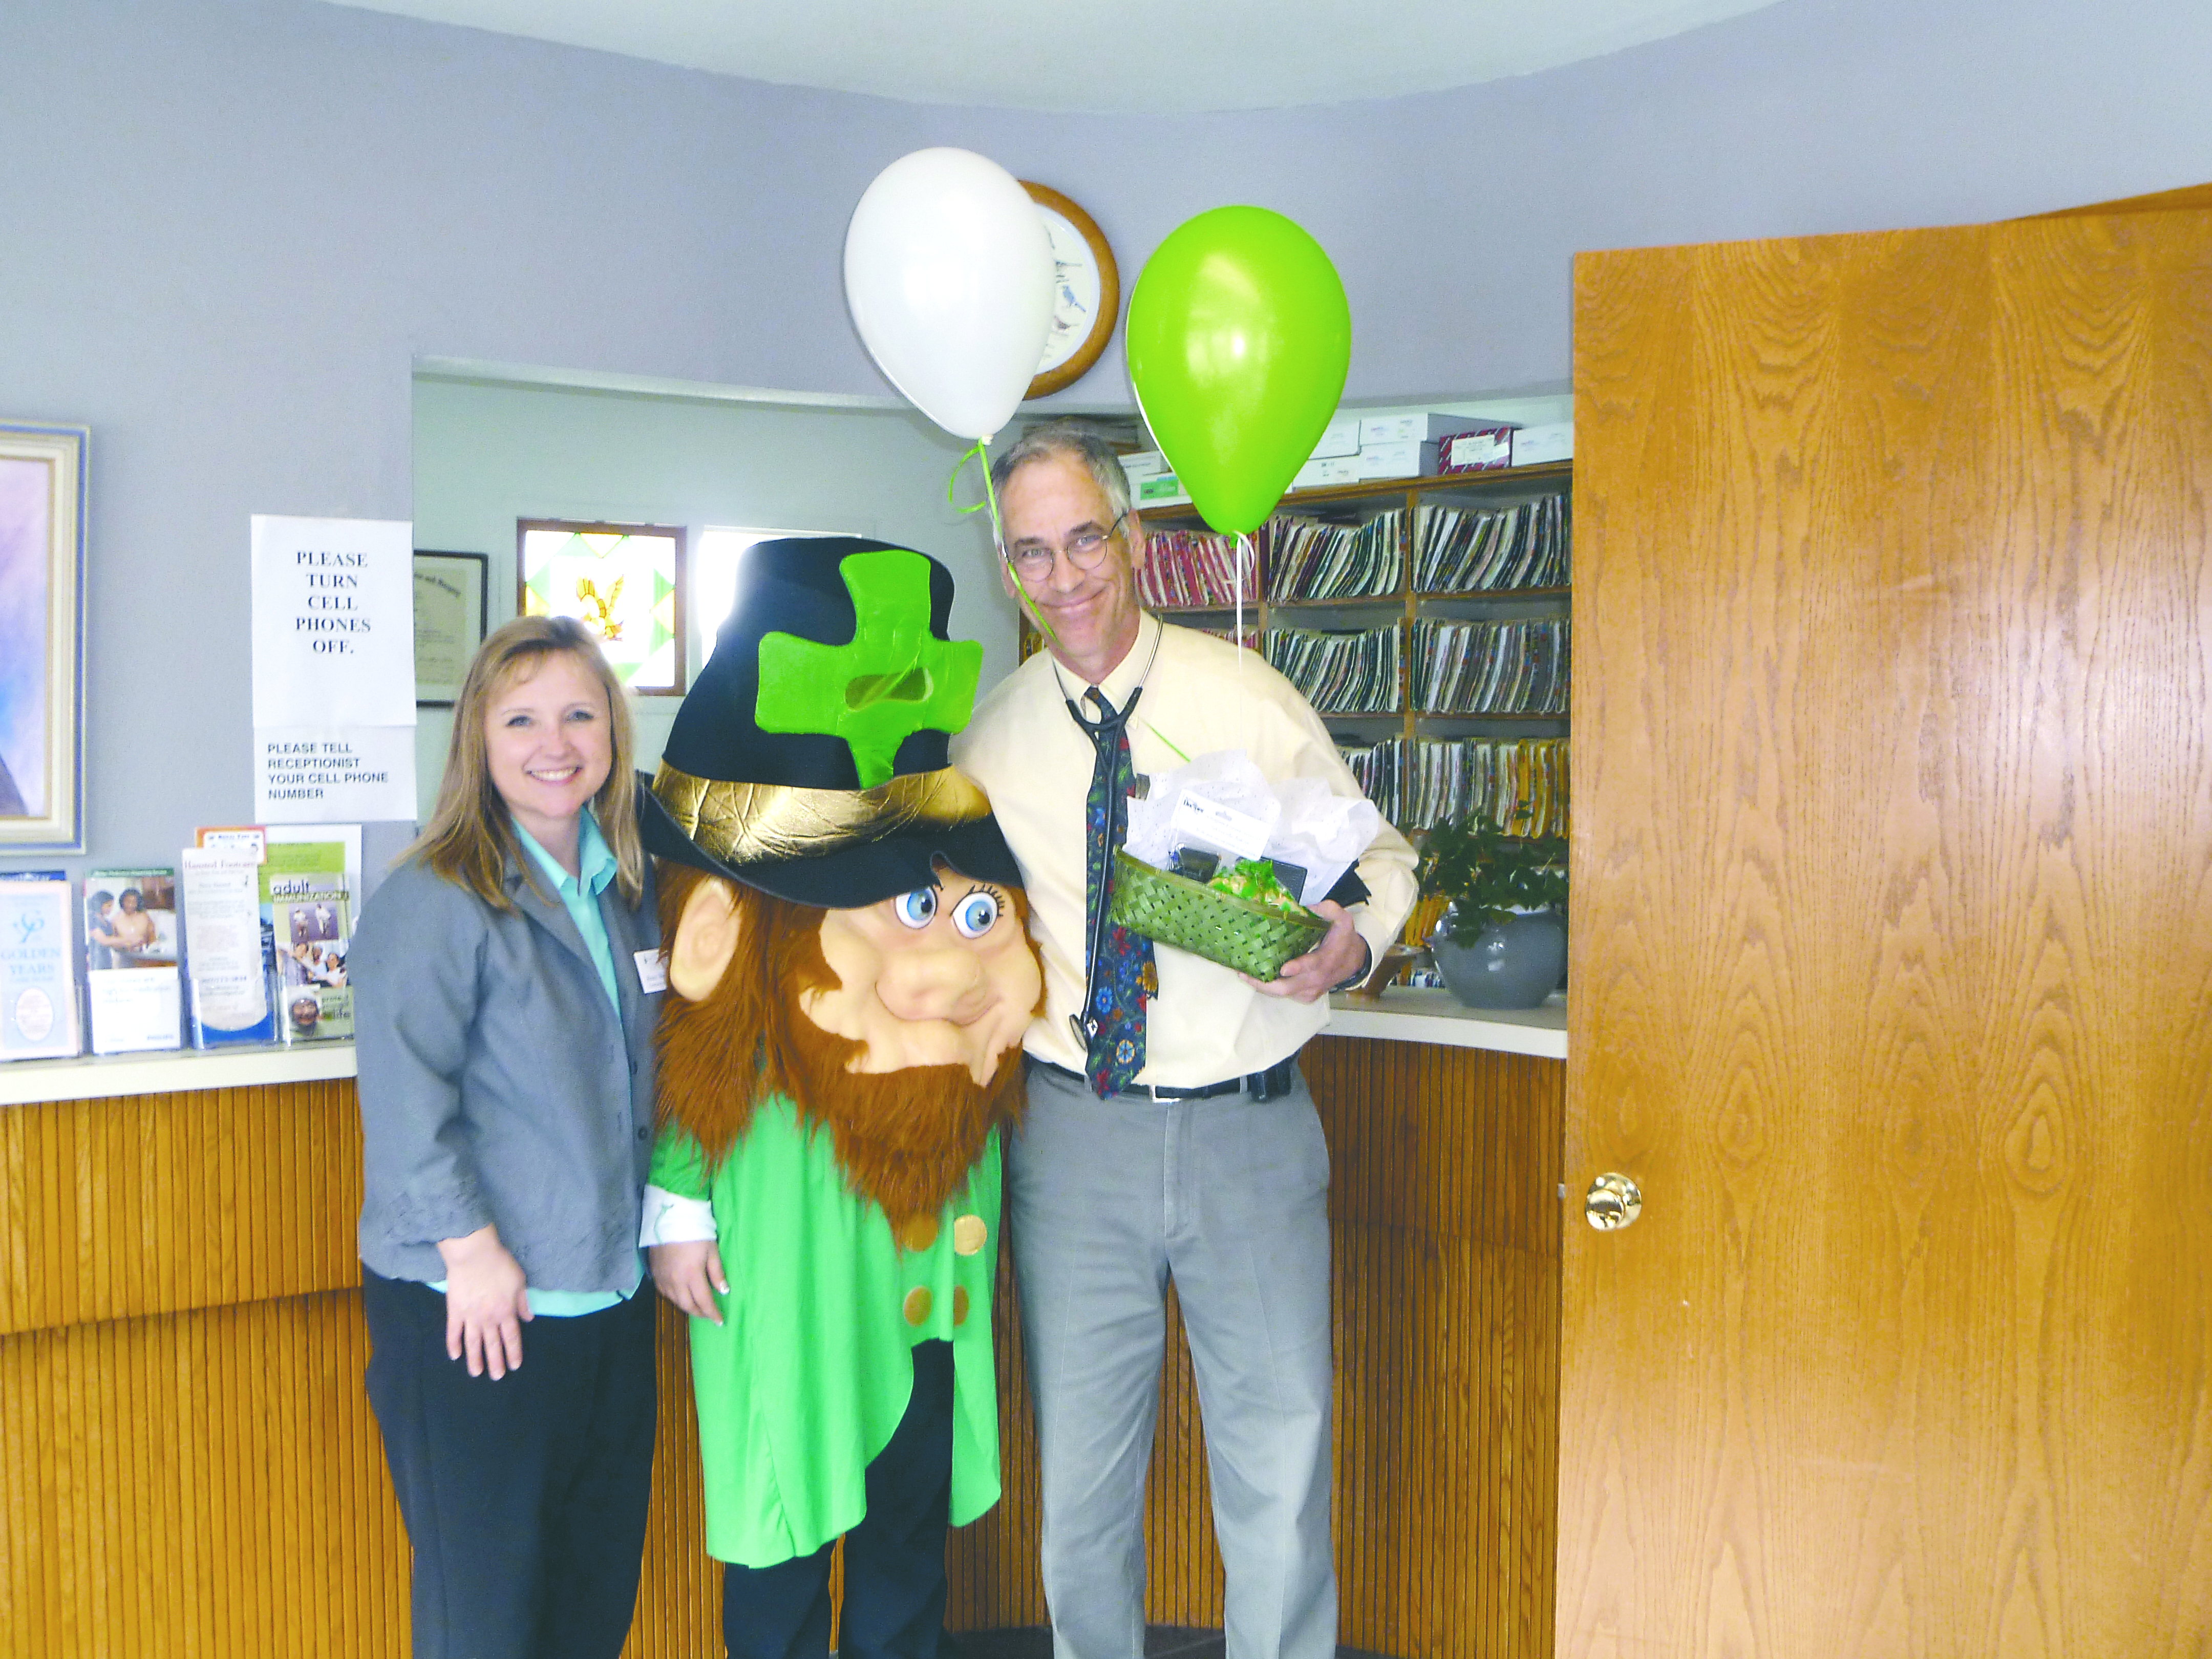 Park View Villas in Port Angeles celebrated St. Patrick's Day a bit early this year